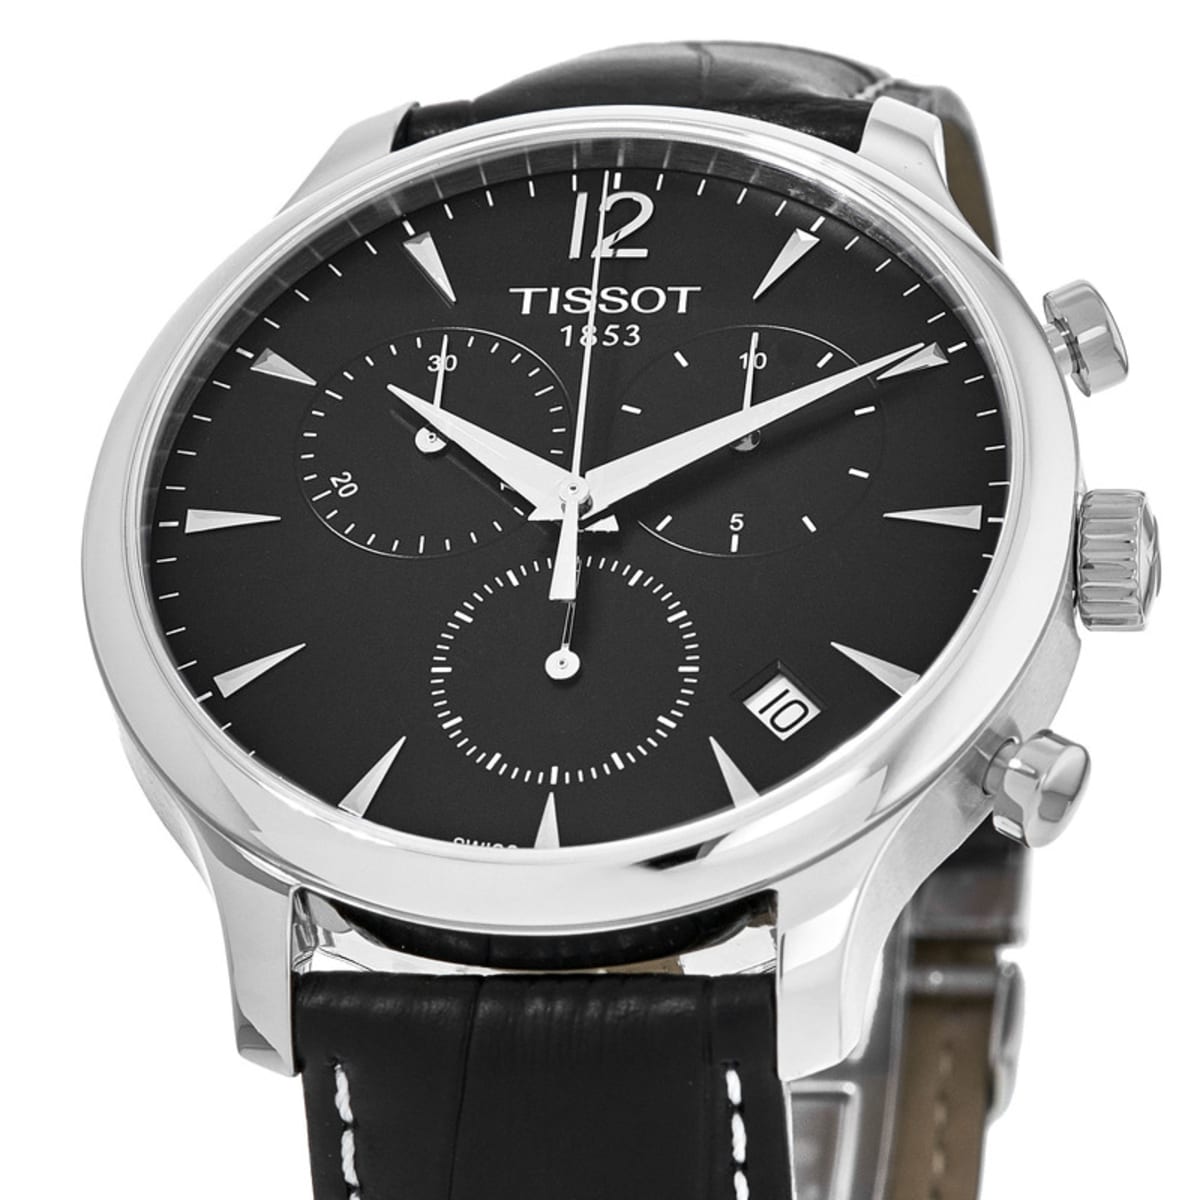 Tissot Tradition Chronograph Black Dial Black Leather Strap Watch For Men - T0636171605700